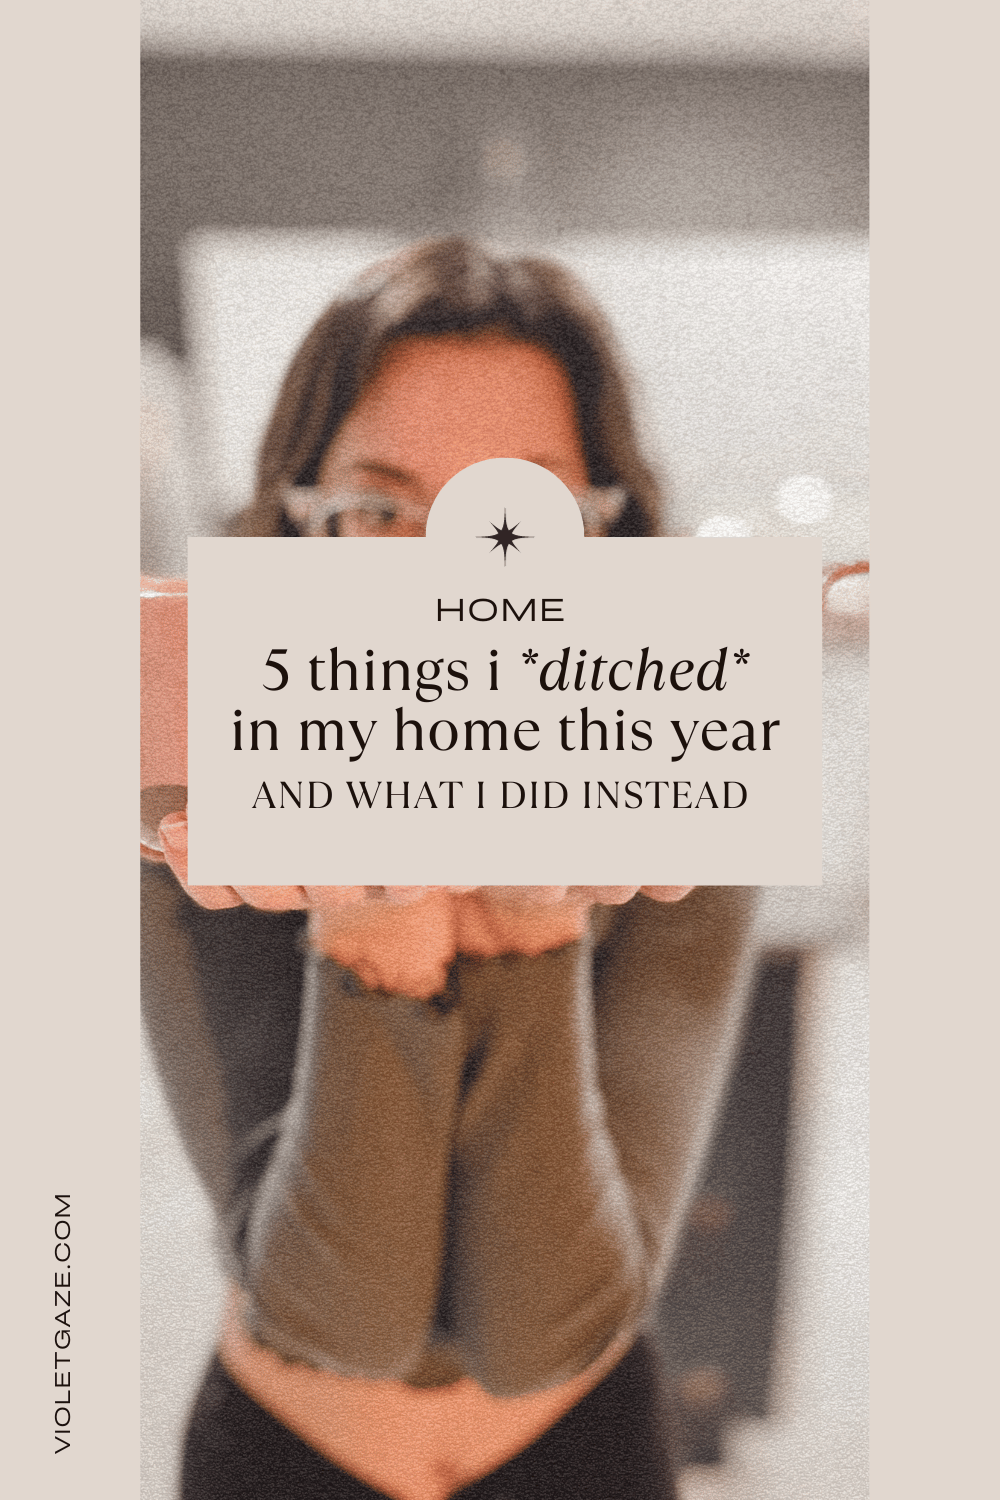 5 things i ditched in my home